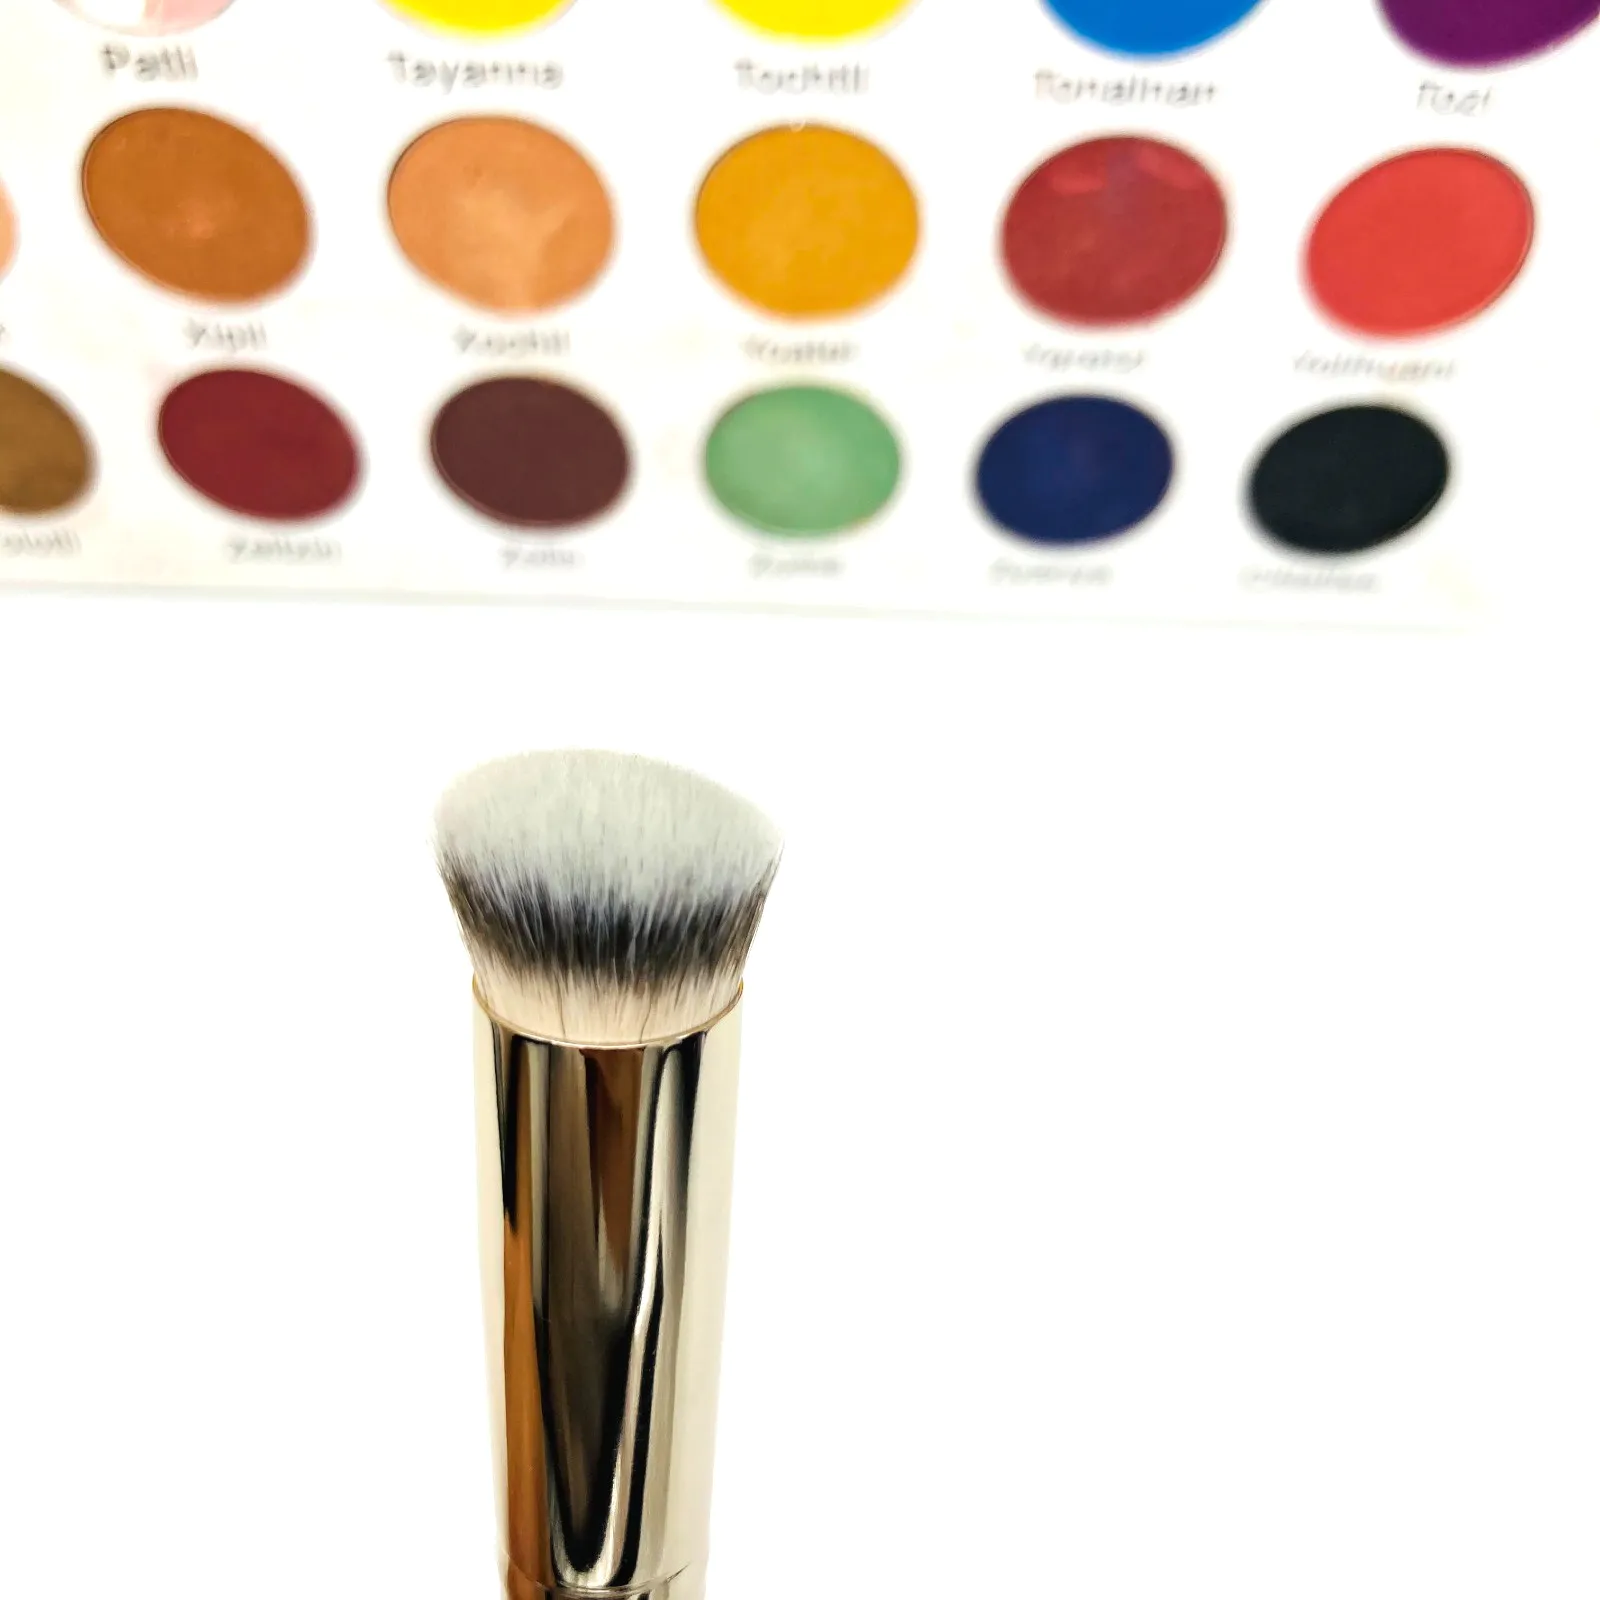 Suprabeauty Top custom made makeup brushes manufacturers for beauty